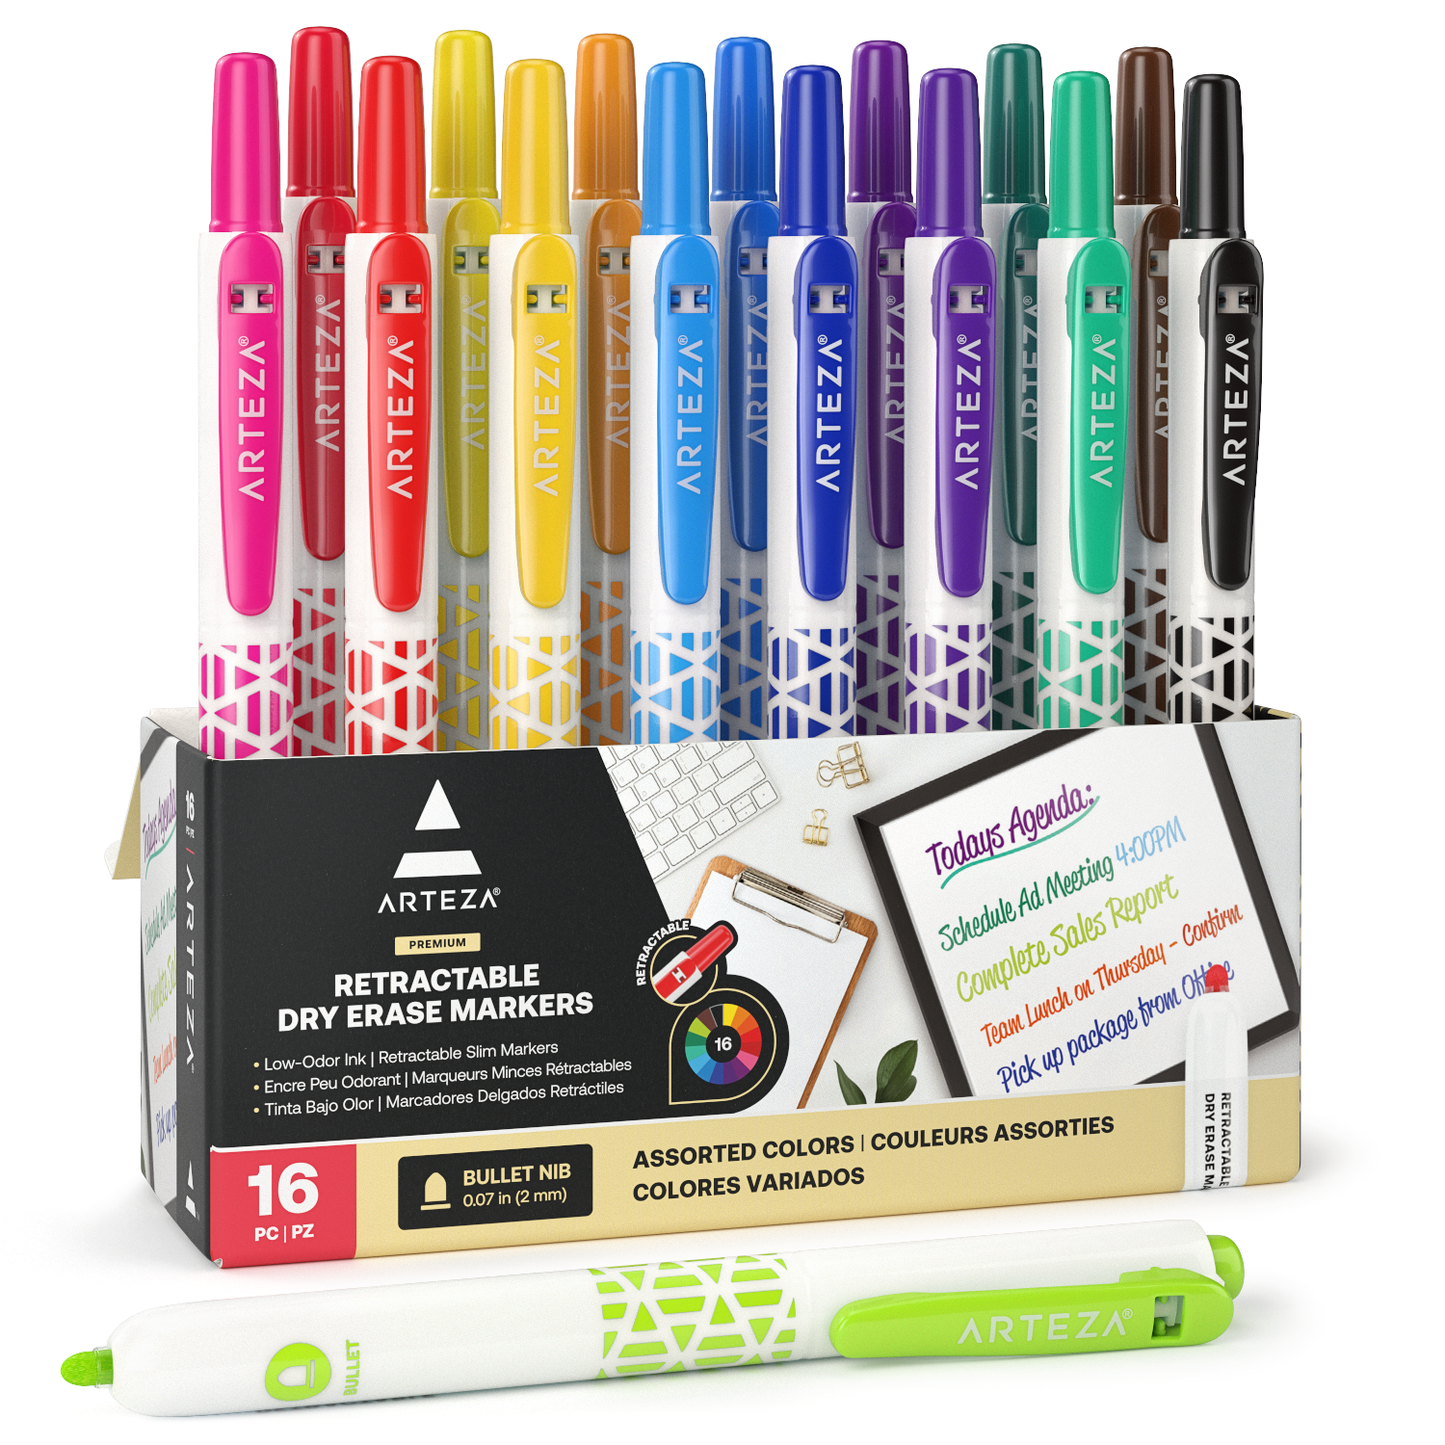 EXPO Low Odor Dry Erase Markers, Ultra-Fine Tip, Indonesia